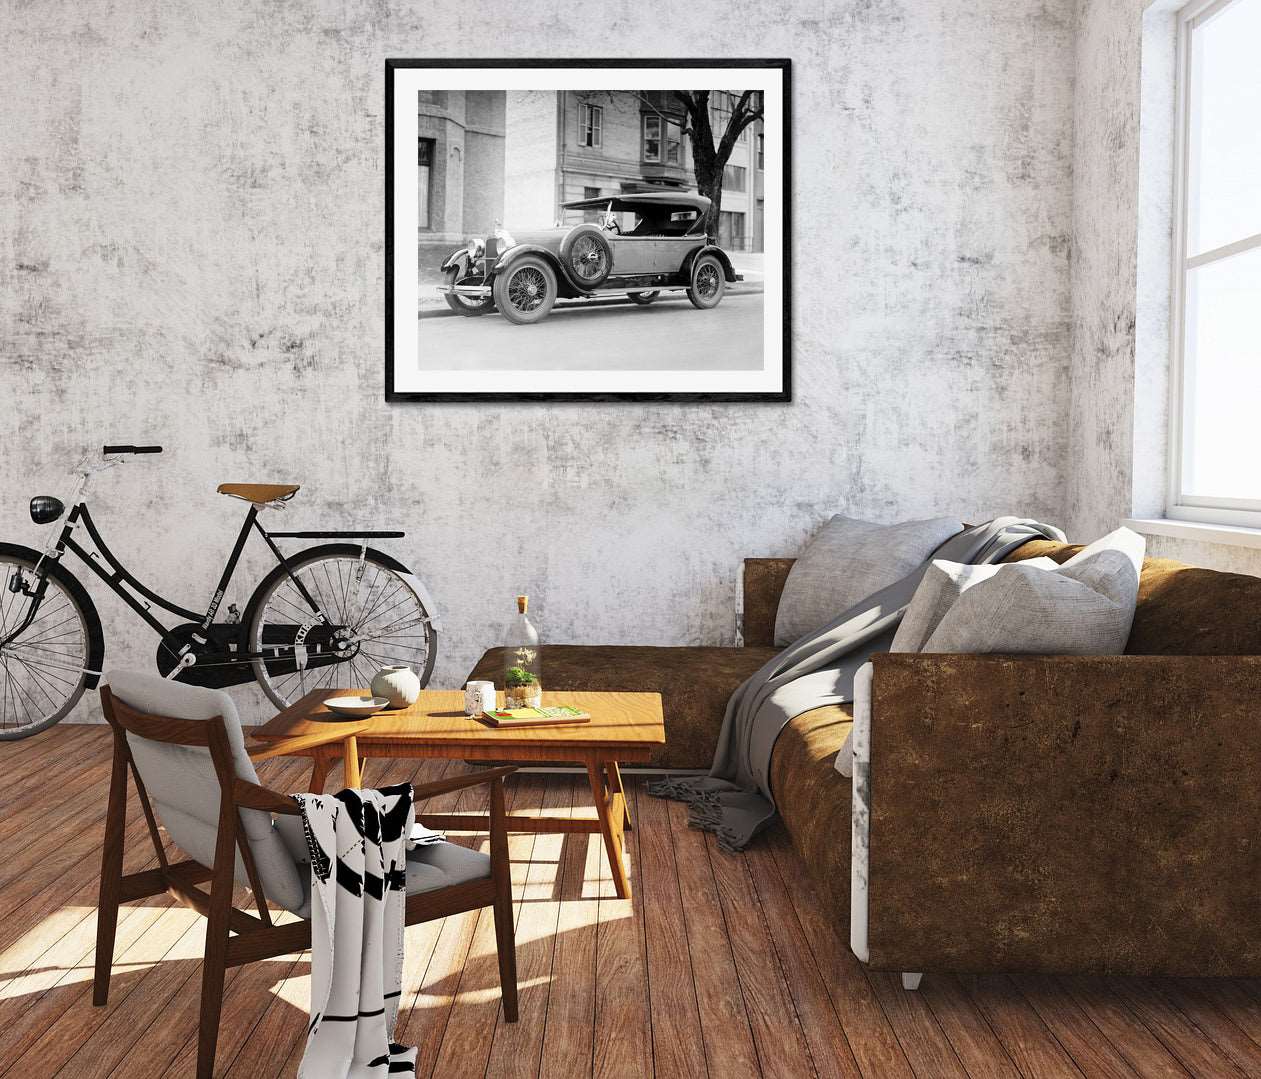 A rendering of a living room with a framed paper print on the wall, featuring vintage photography